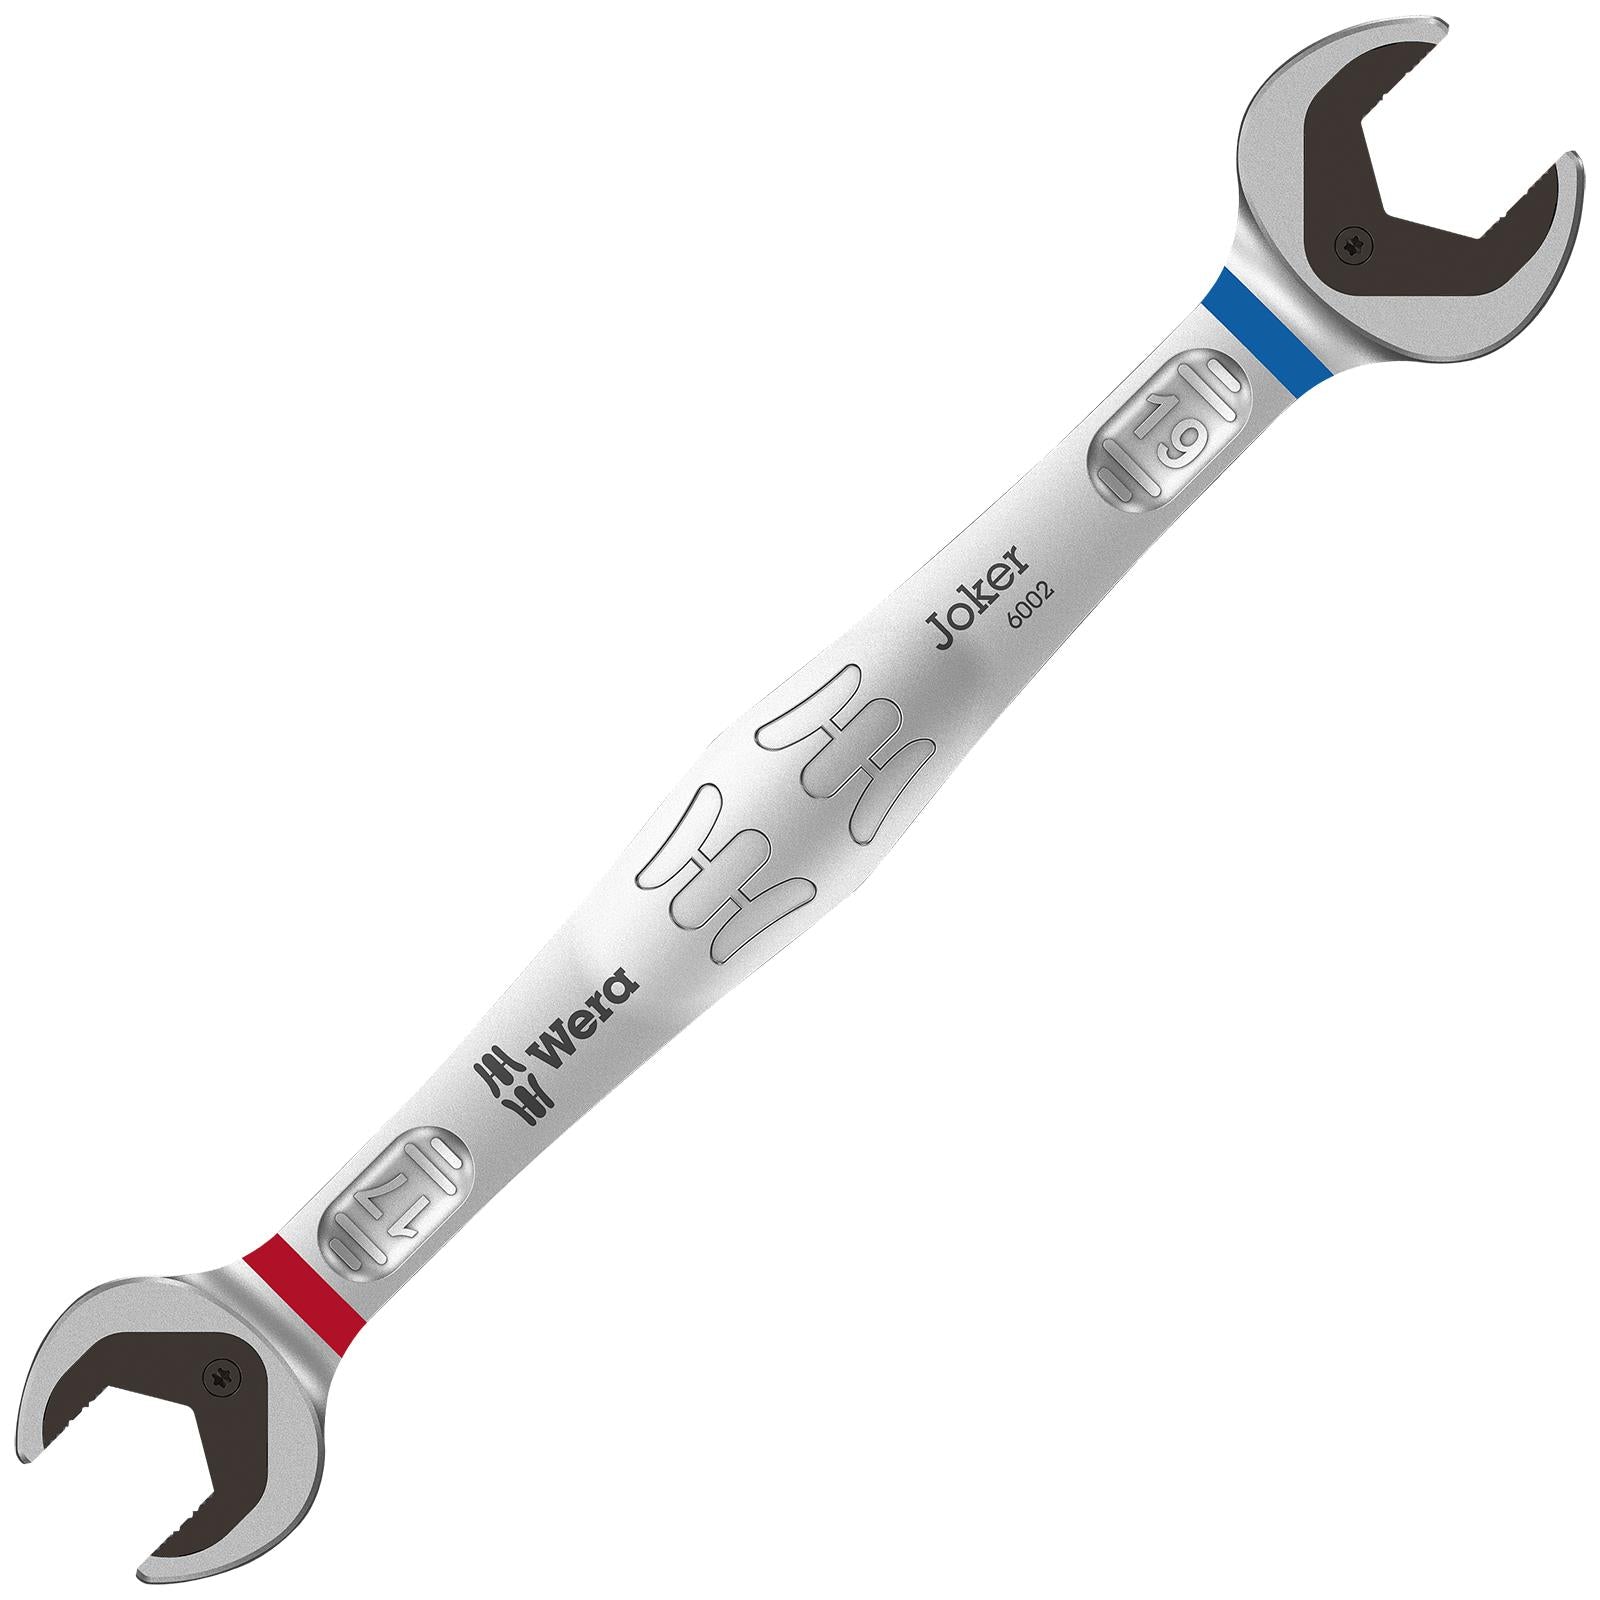 Wera 6002 Joker Double Open Ended Spanner Wrench Metric with Holding Function